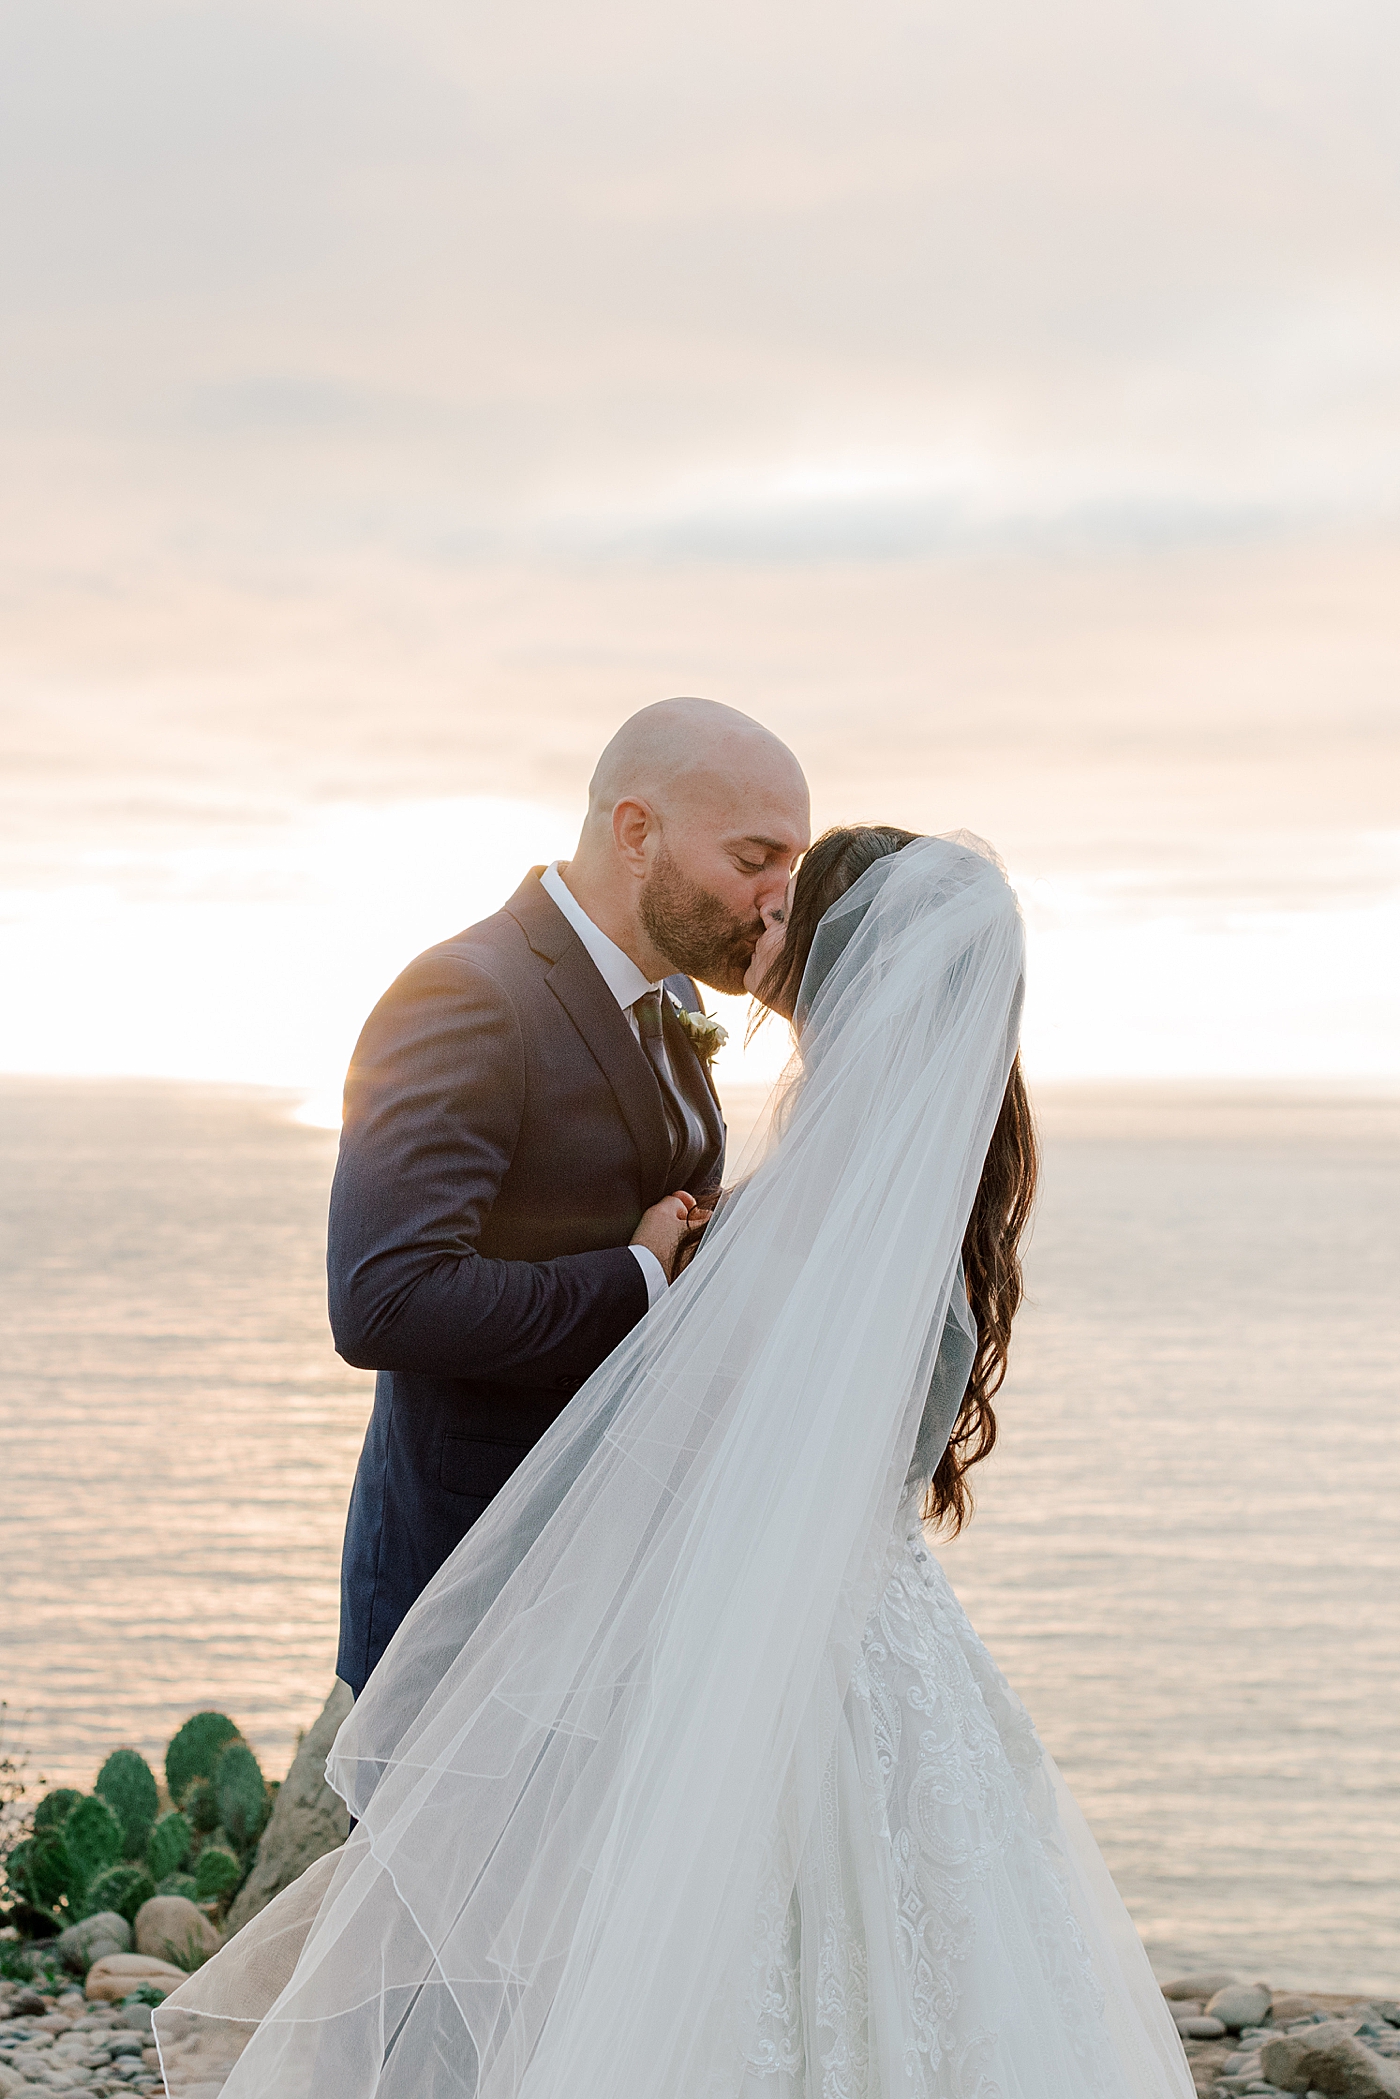 Groom in navy suit and bride in wedding dress holding each other and kissing on a seaside path at sunset | Image by San Diego Wedding Photographer Hope Helmuth